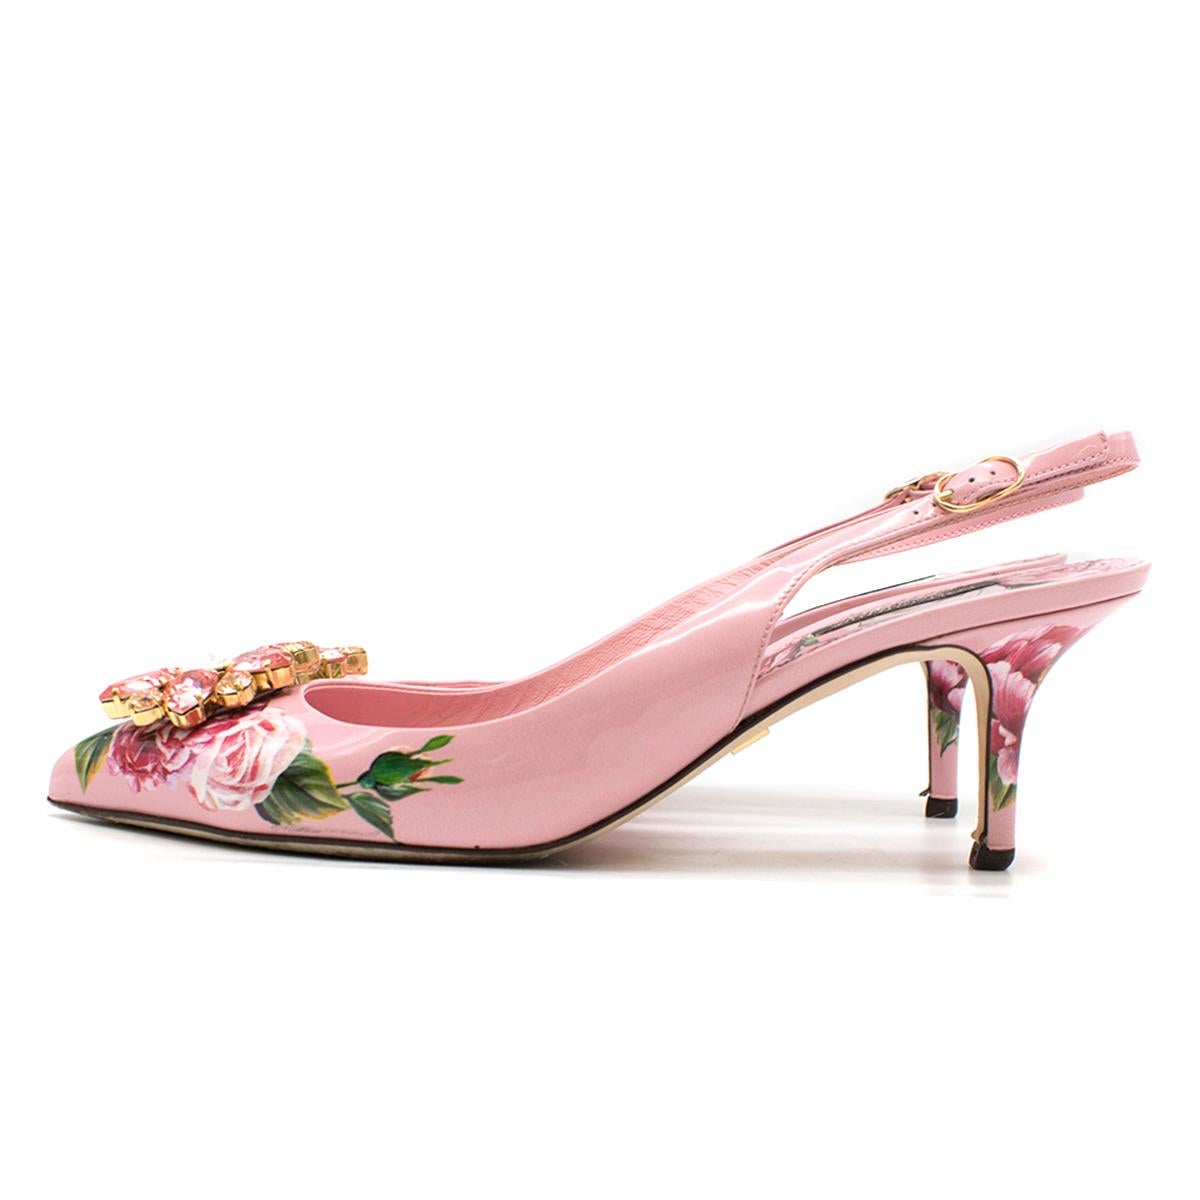 dolce and gabbana floral pumps